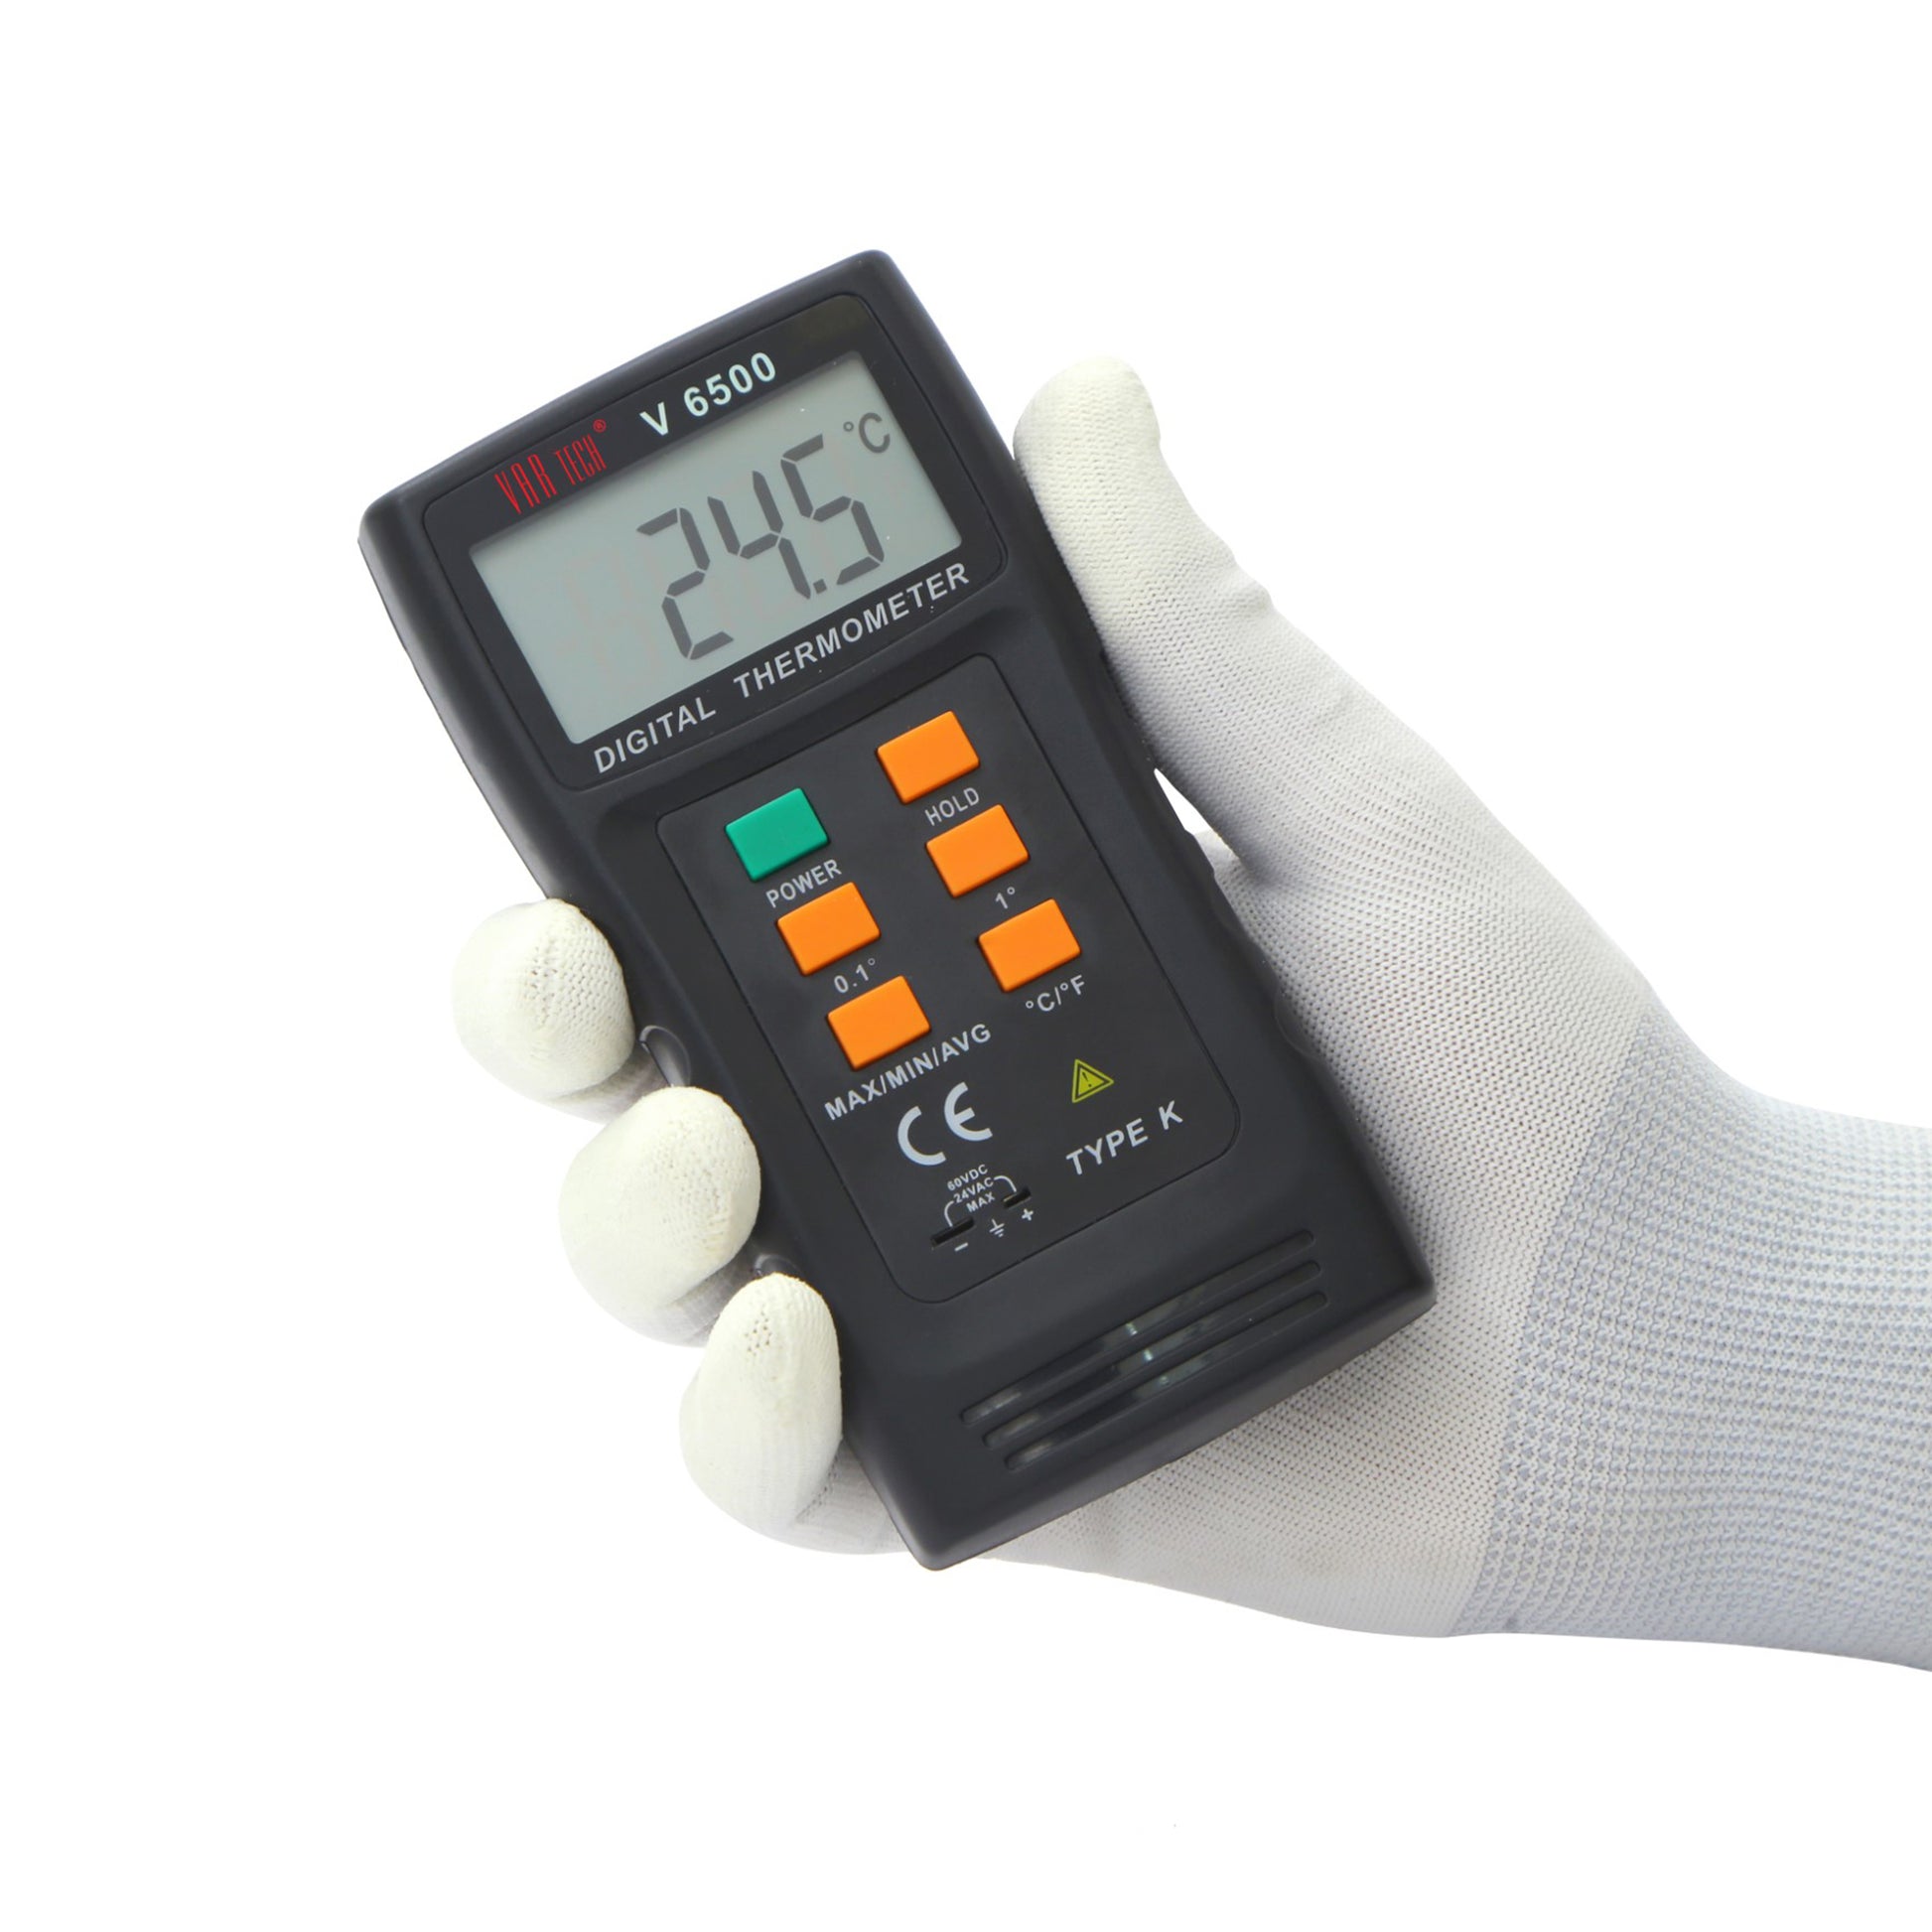 V 6500 Digital industrial thermometer High precision and Accuracy k type thermocouple